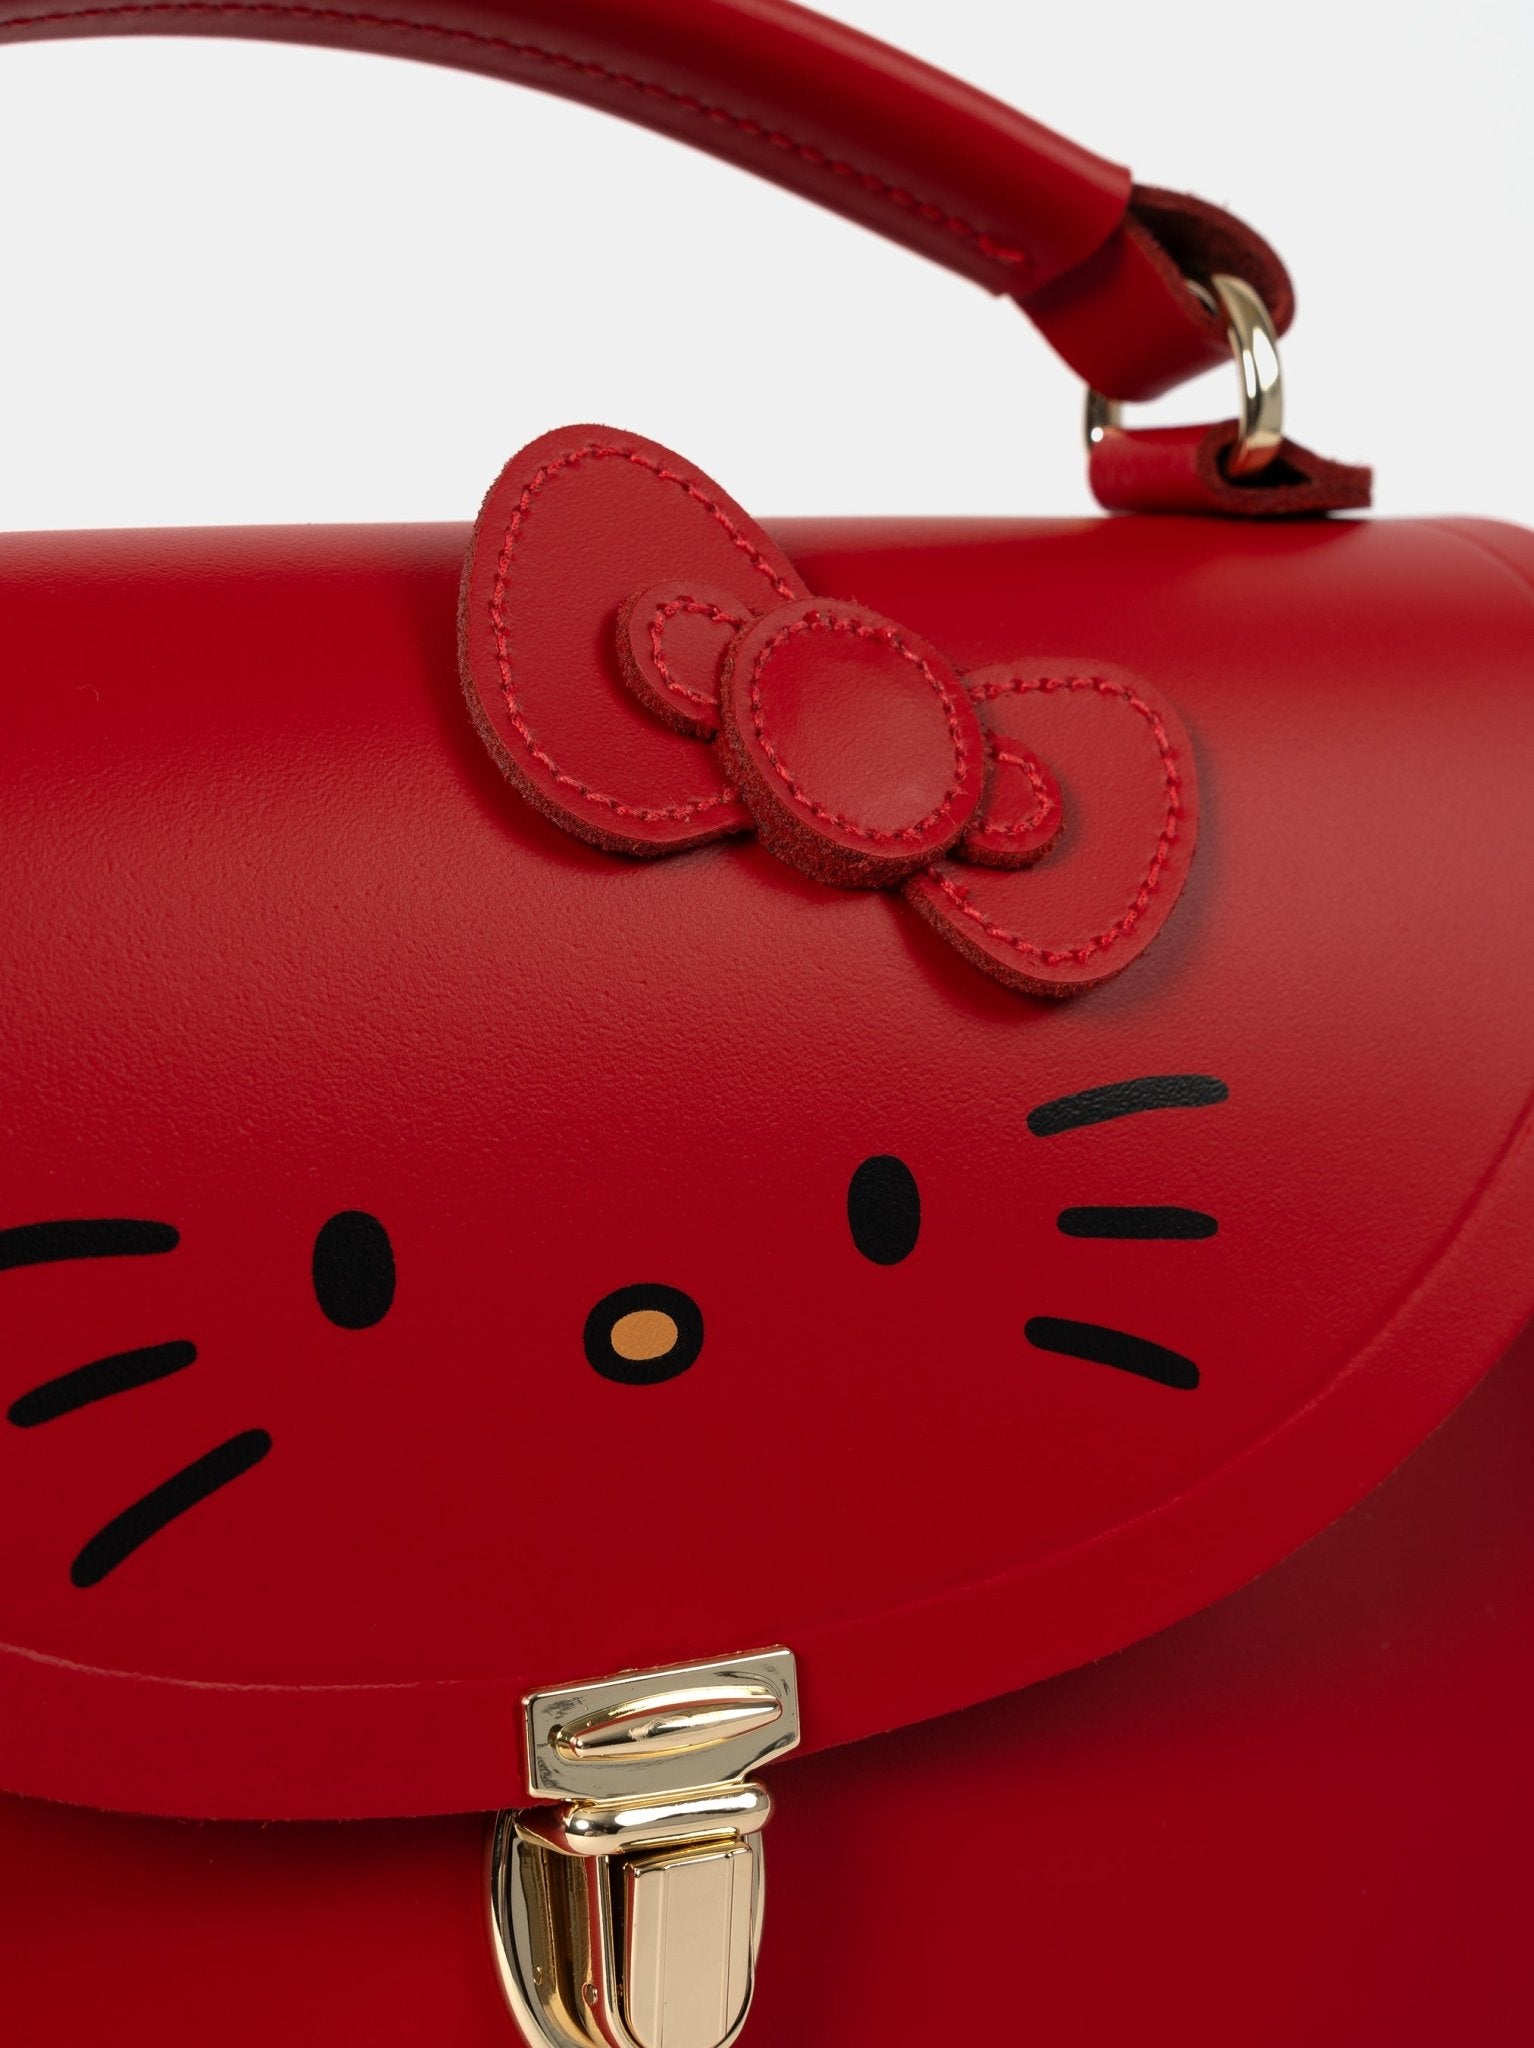 The Hello Kitty Poppy Backpack - Red - Cambridge Satchel